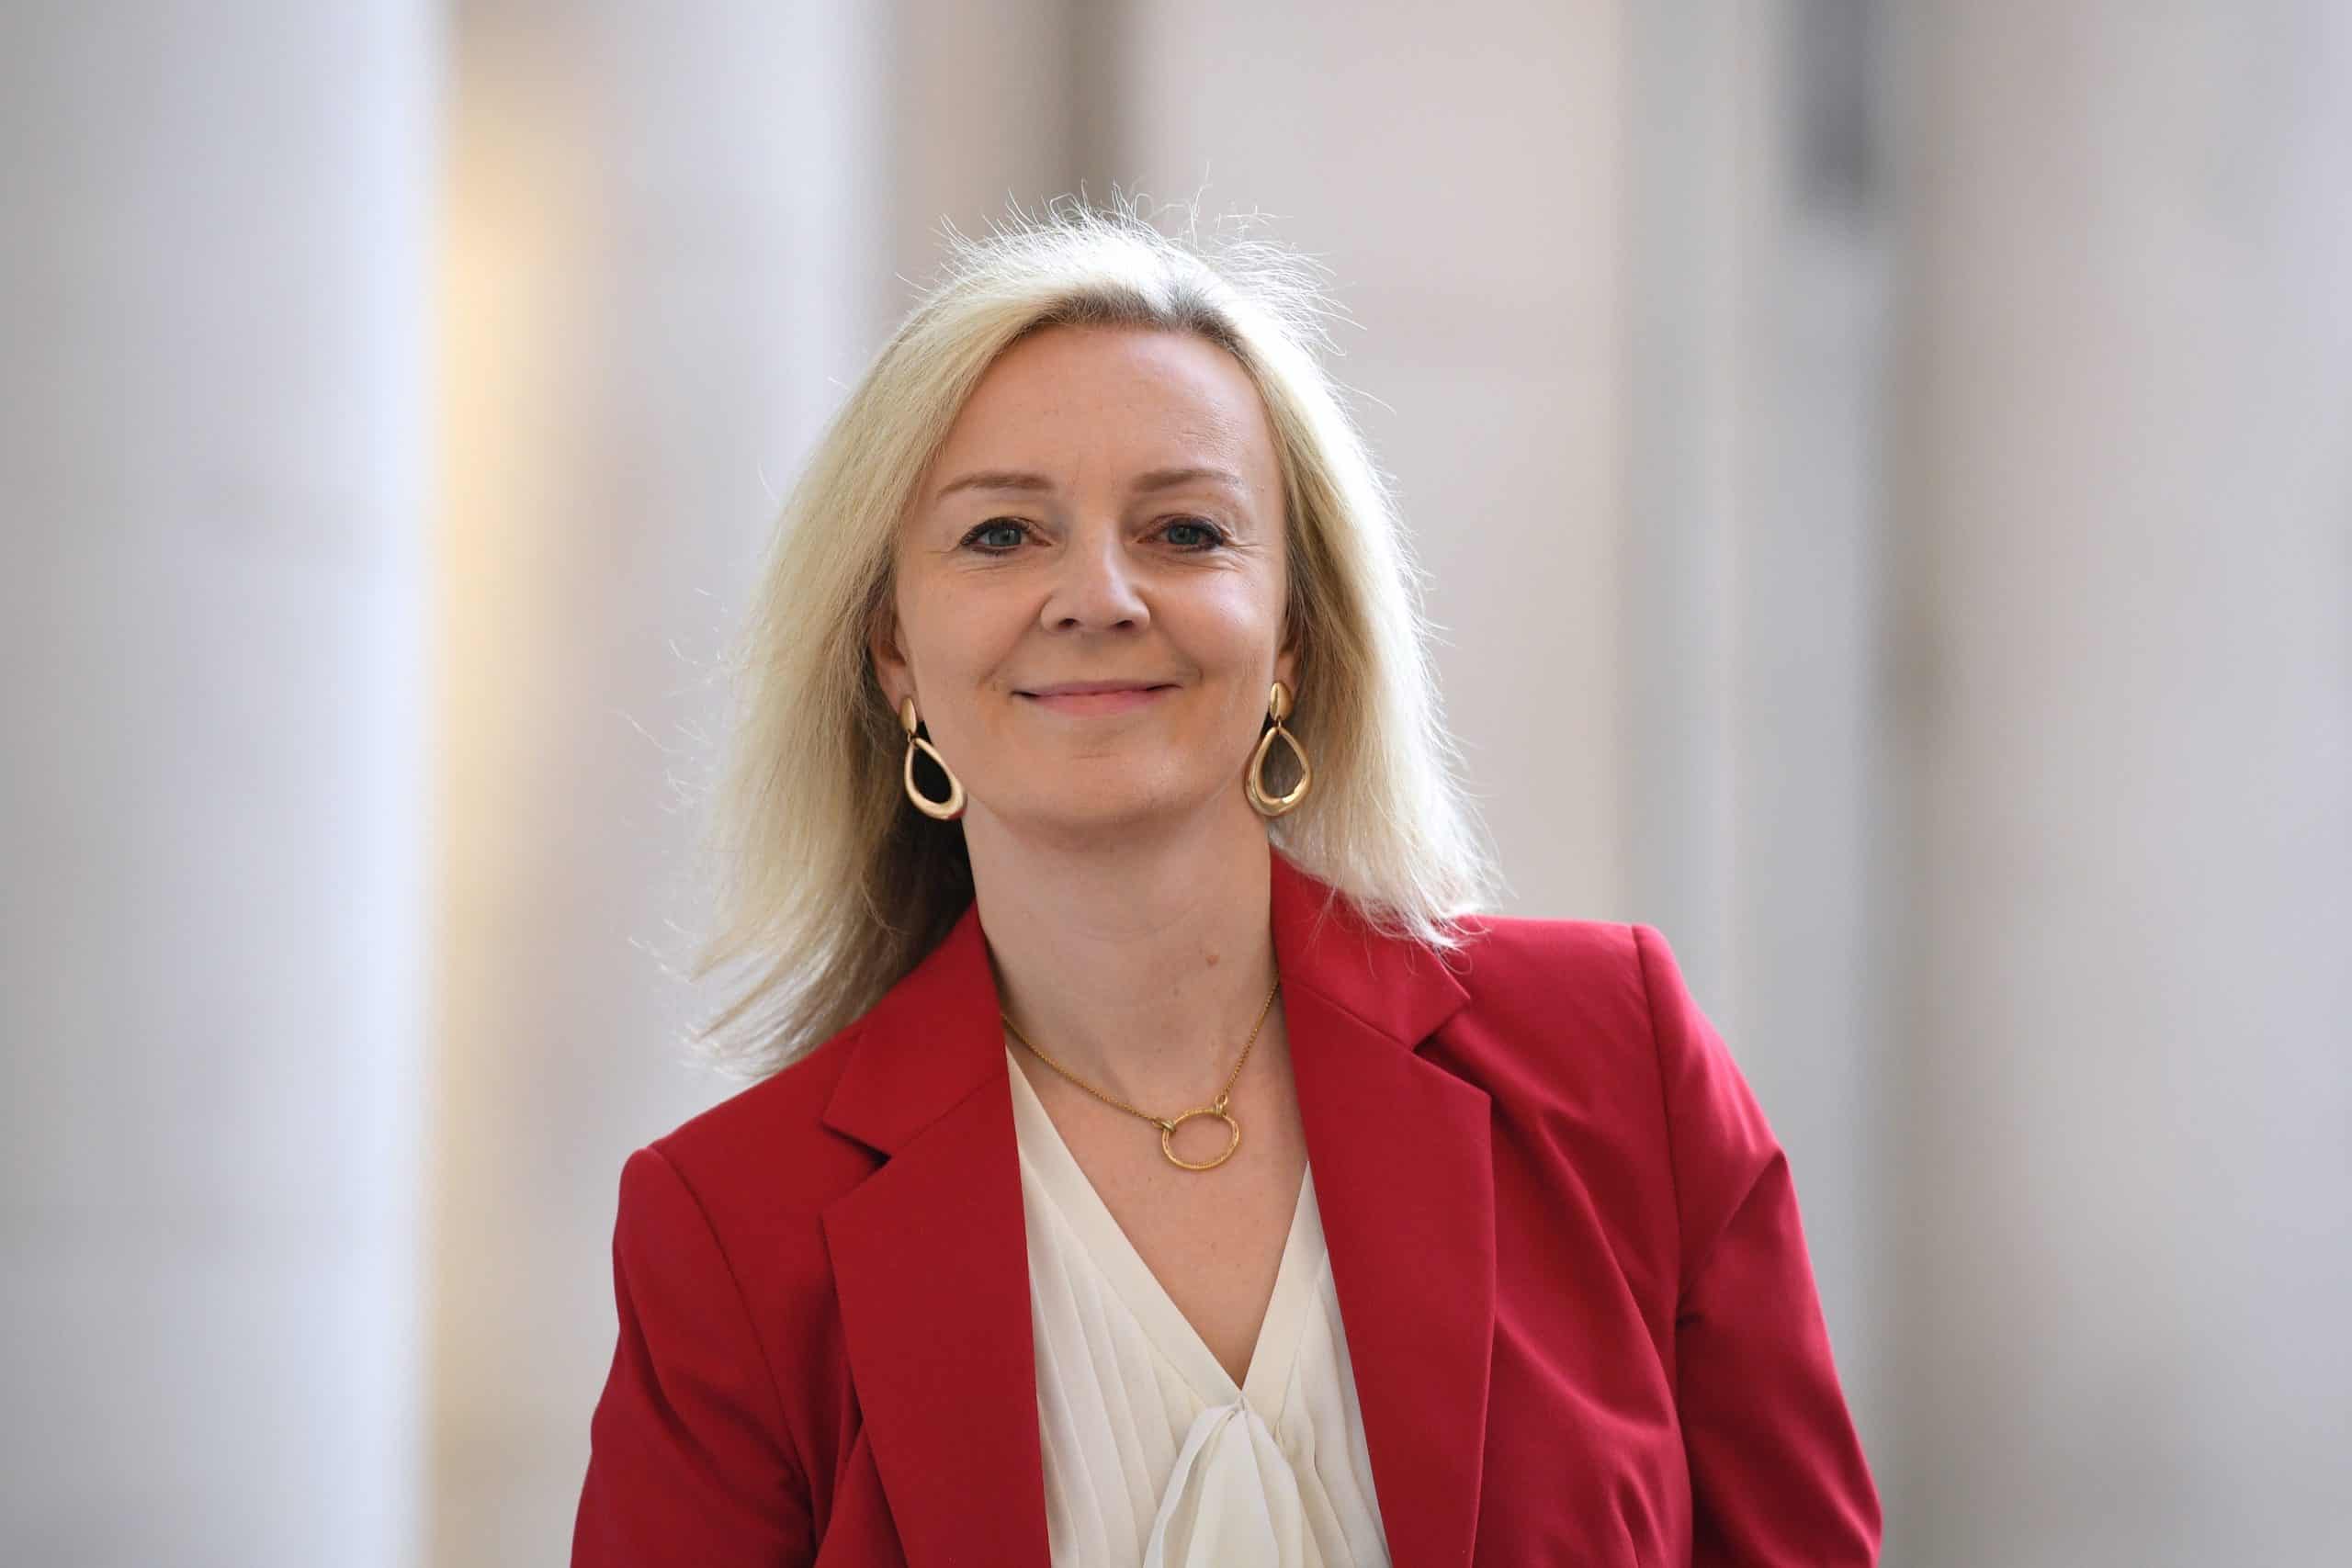 WATCH: Liz Truss says ‘now is the time to end ludicrous debates’